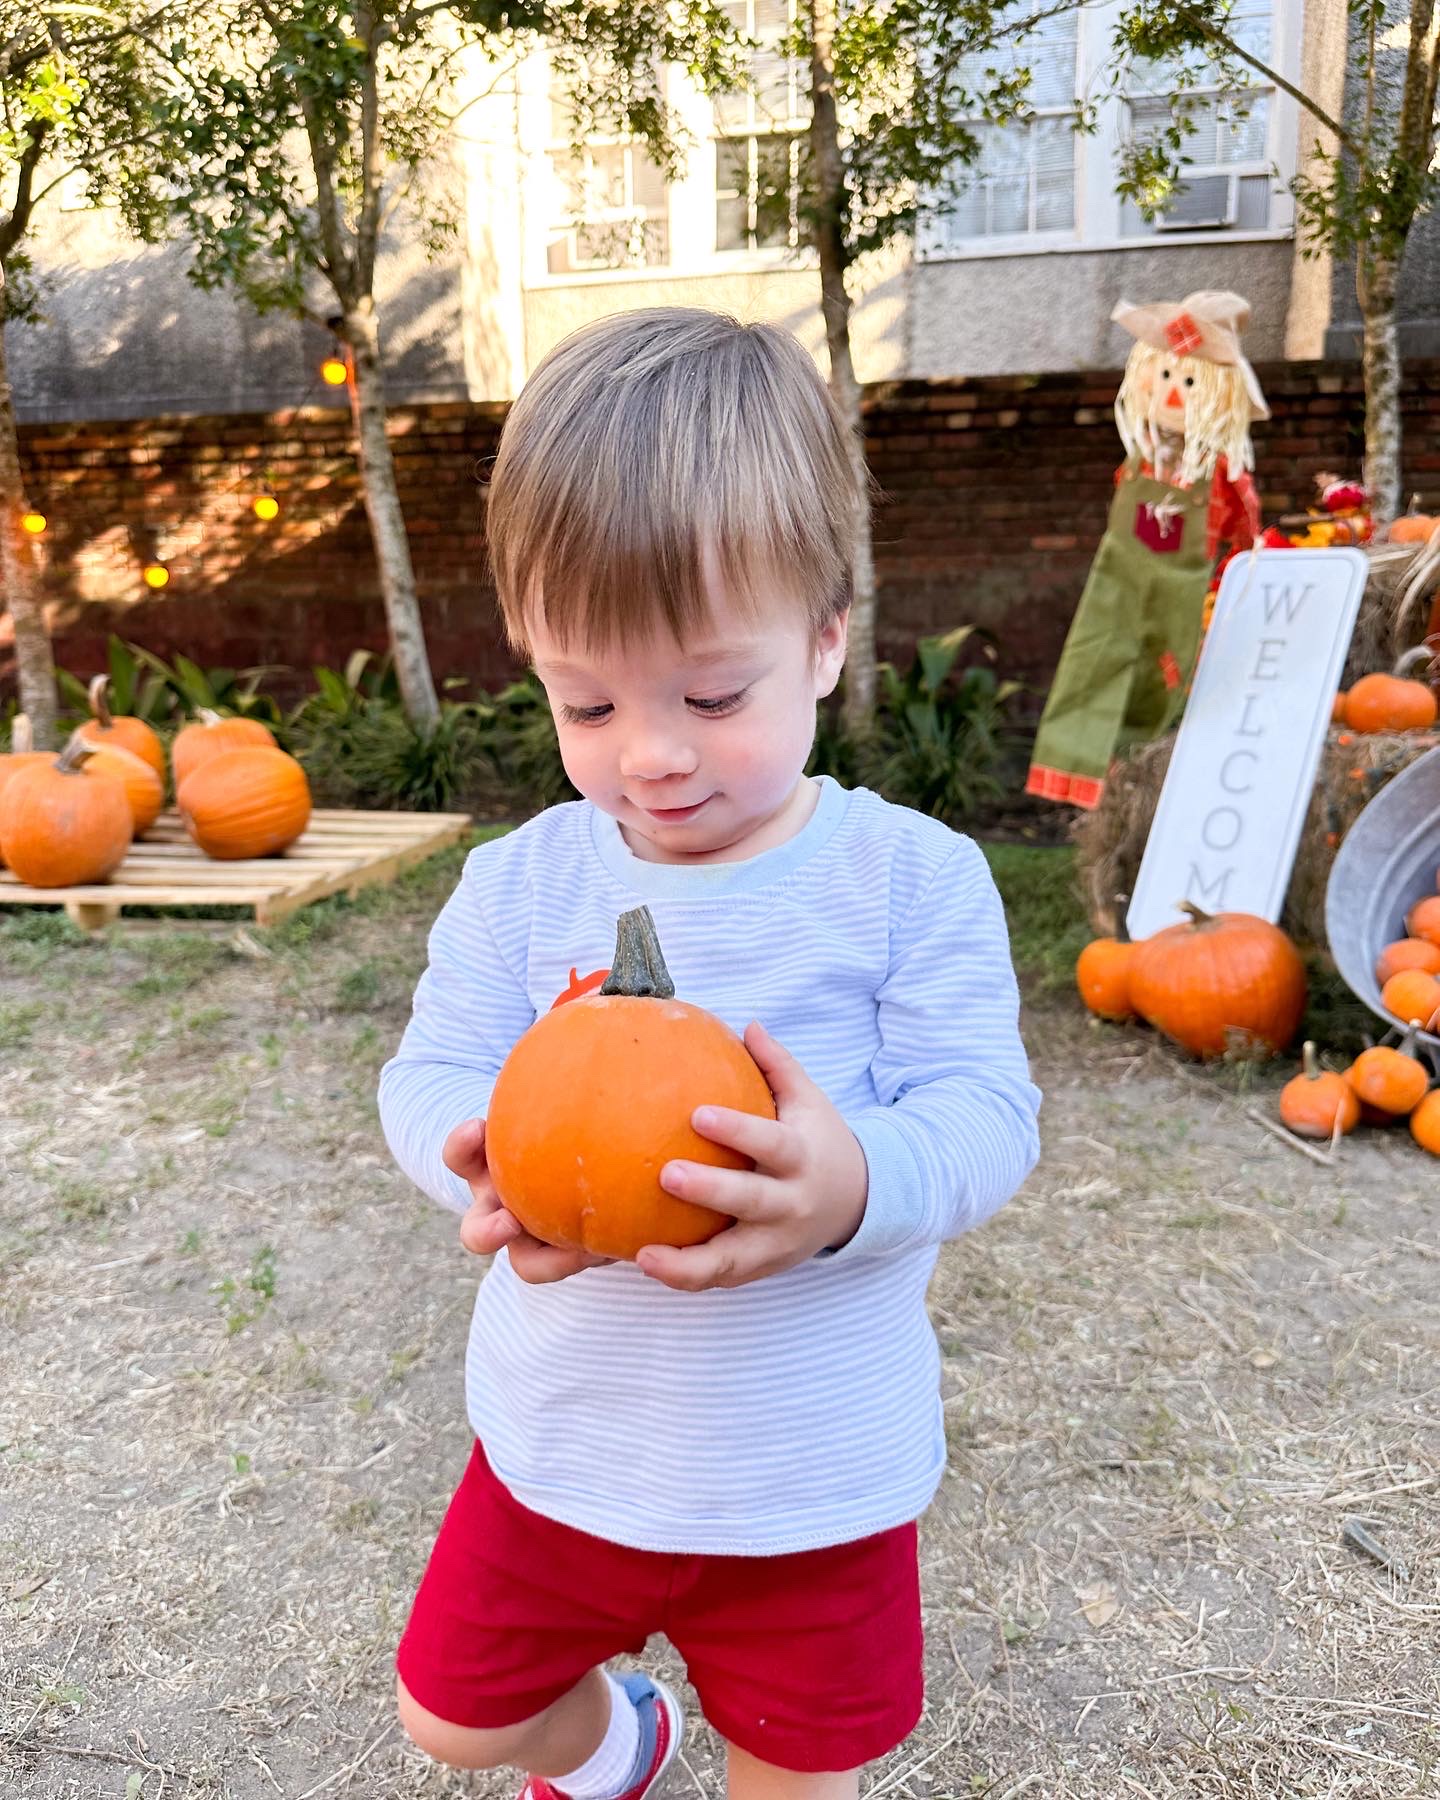 Visit the Largest Pumpkin Patch in New Orleans!